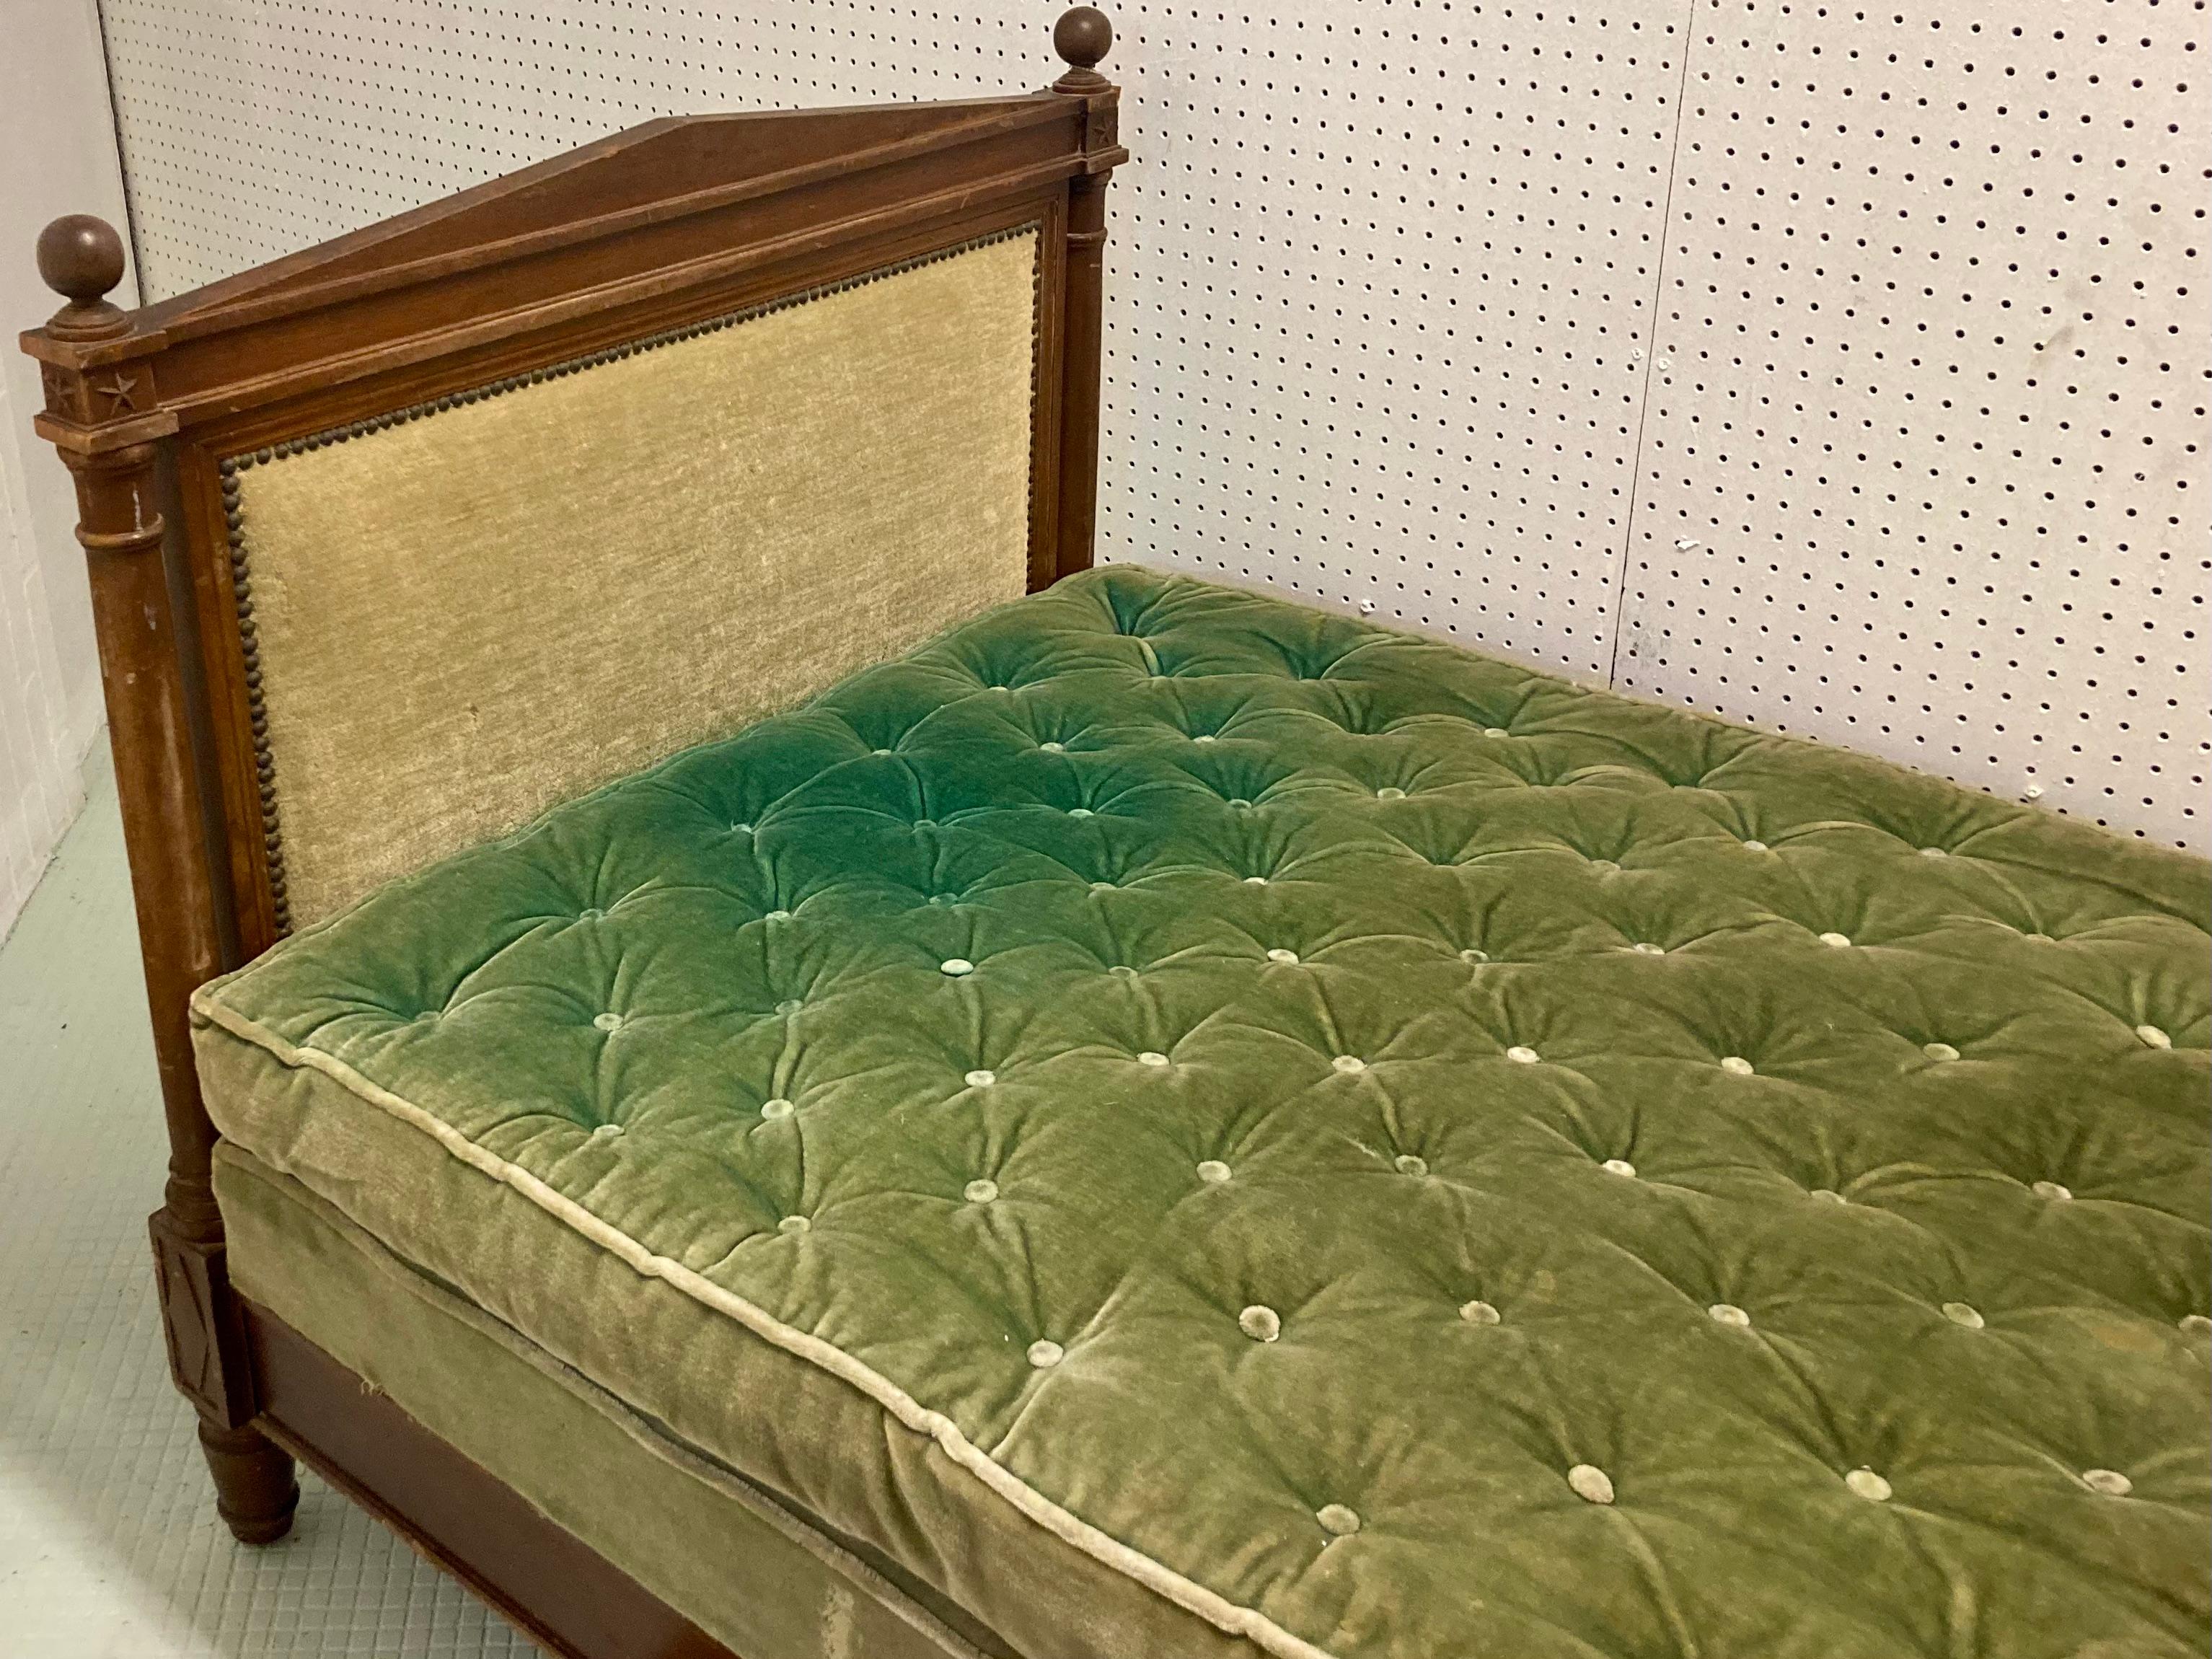 Beautiful French 19th Century Directoire daybed with original tufted upholstered seat cushion set. This is complete frame and seat cushion set. Leave as-is in original Mohhair fabric or recover everything to your liking. It is important to have the